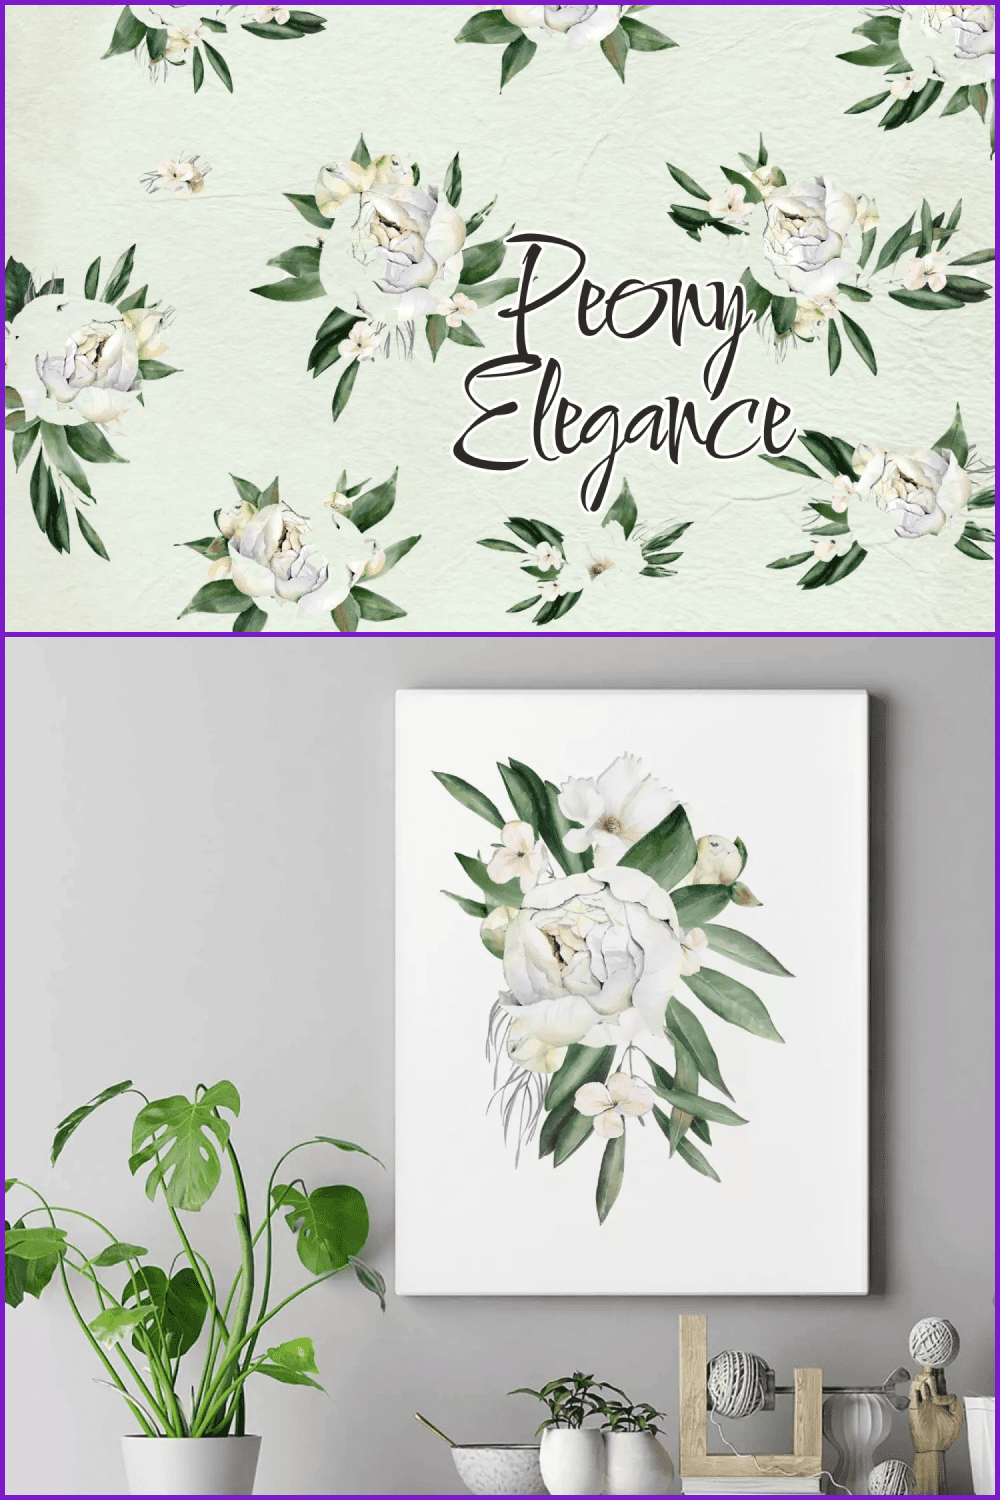 White peony with green leafes on the painting.